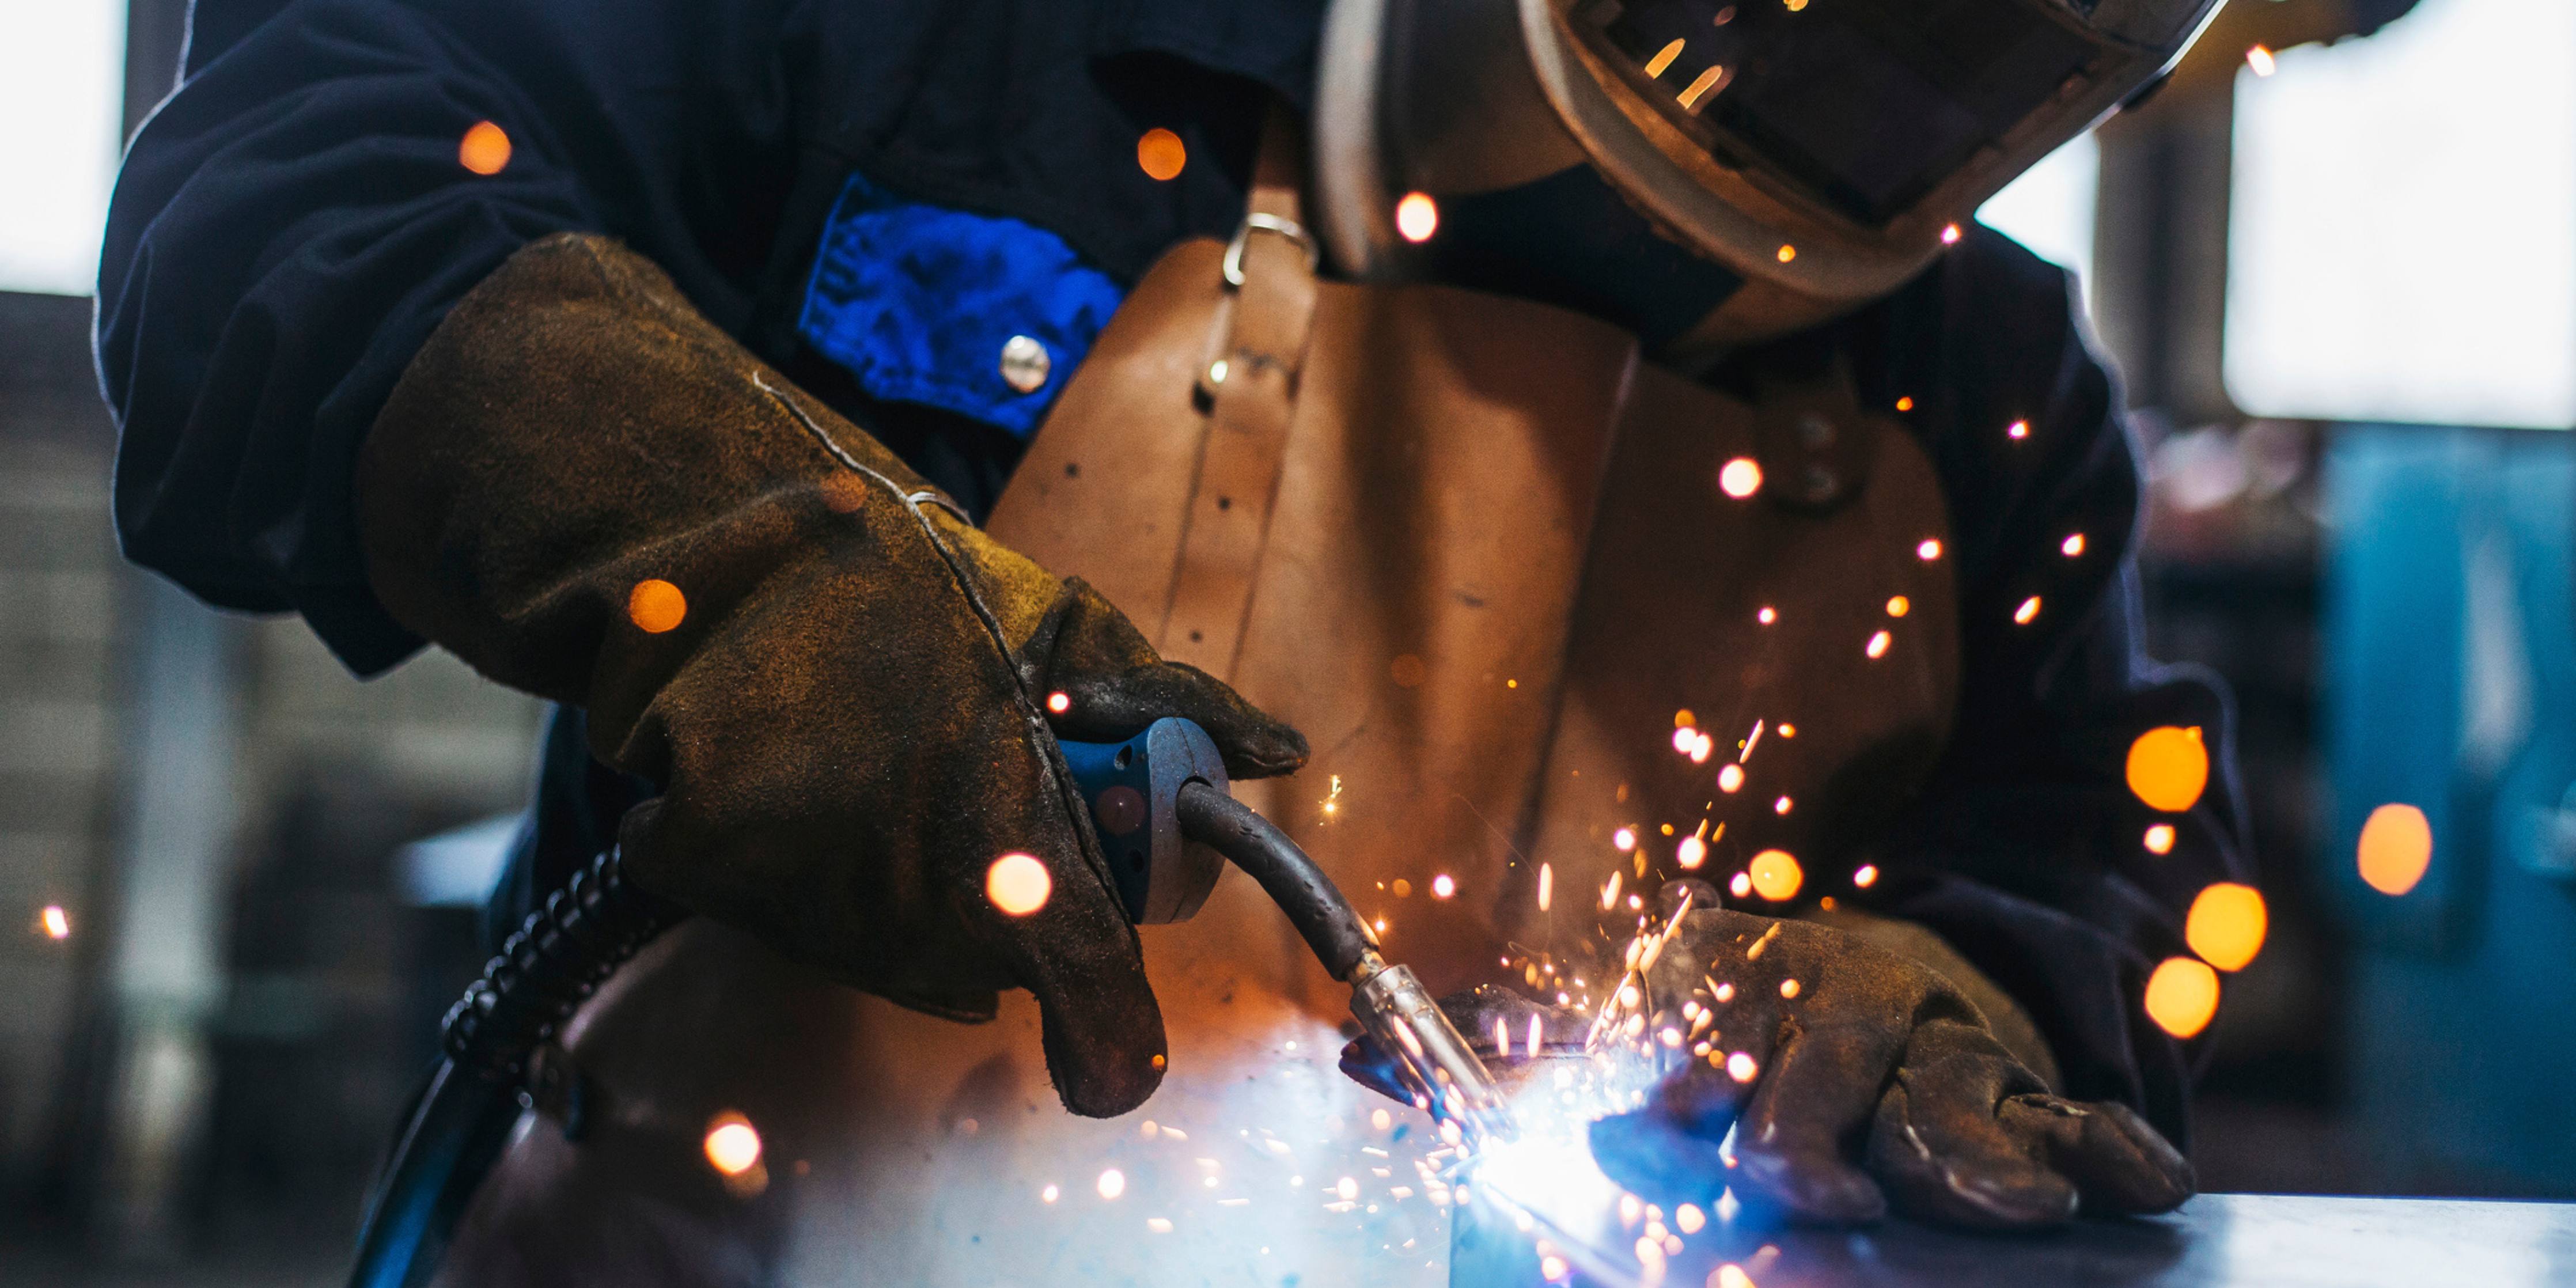 Image of a person welding wearing safety shield, vest and gloves